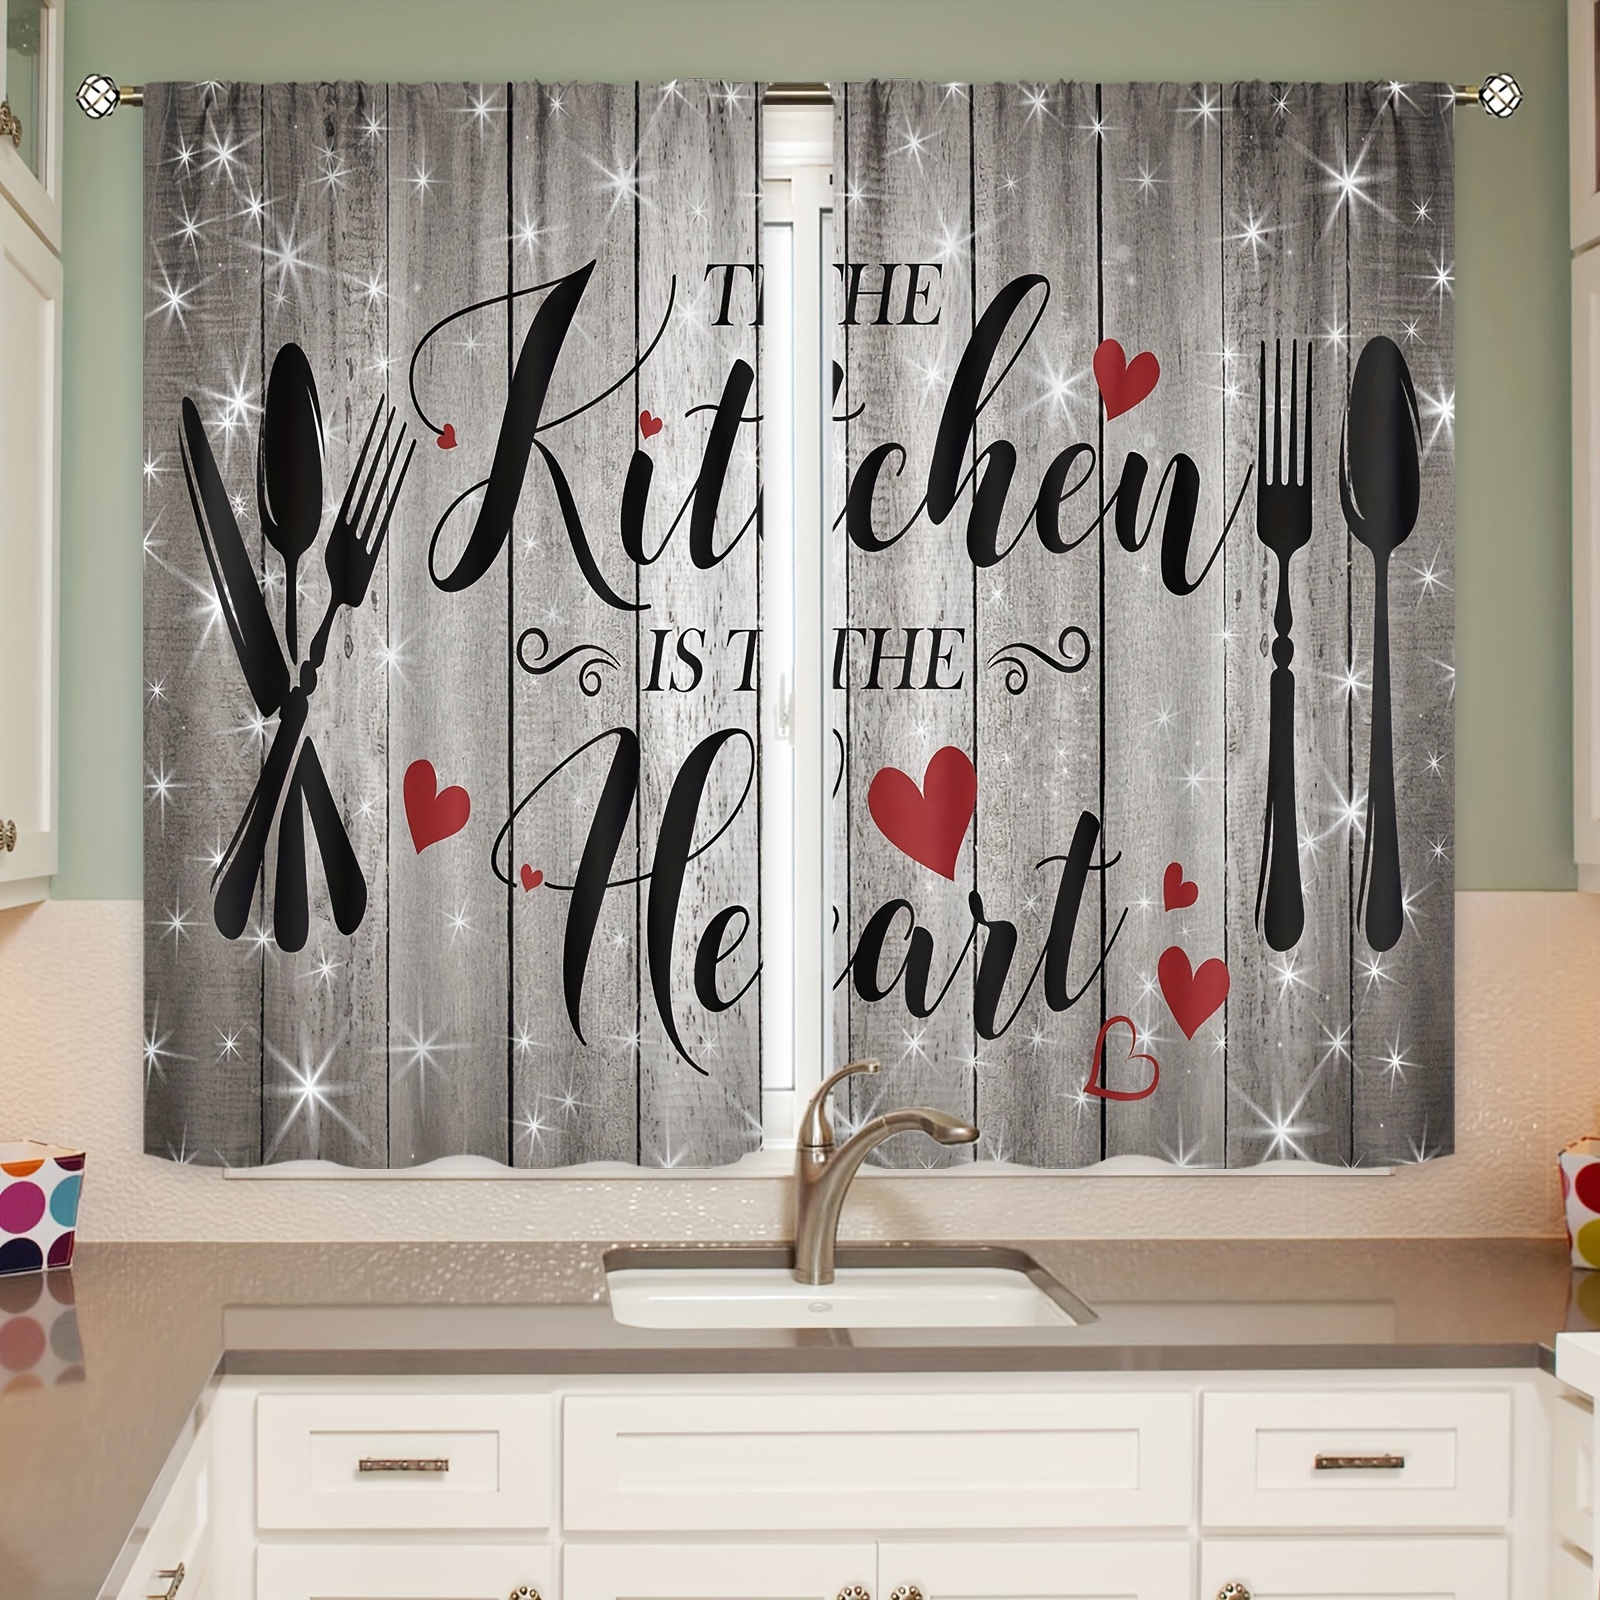 

Vintage Kitchen Curtains Short Small Rustic Stars Wooden Plank Board Fork And Knife Country Farmhouse Rod Pocket Funny Quotes Bedroom Living Room Treatment Fabric 2 Panels 27.5wx39h Inch